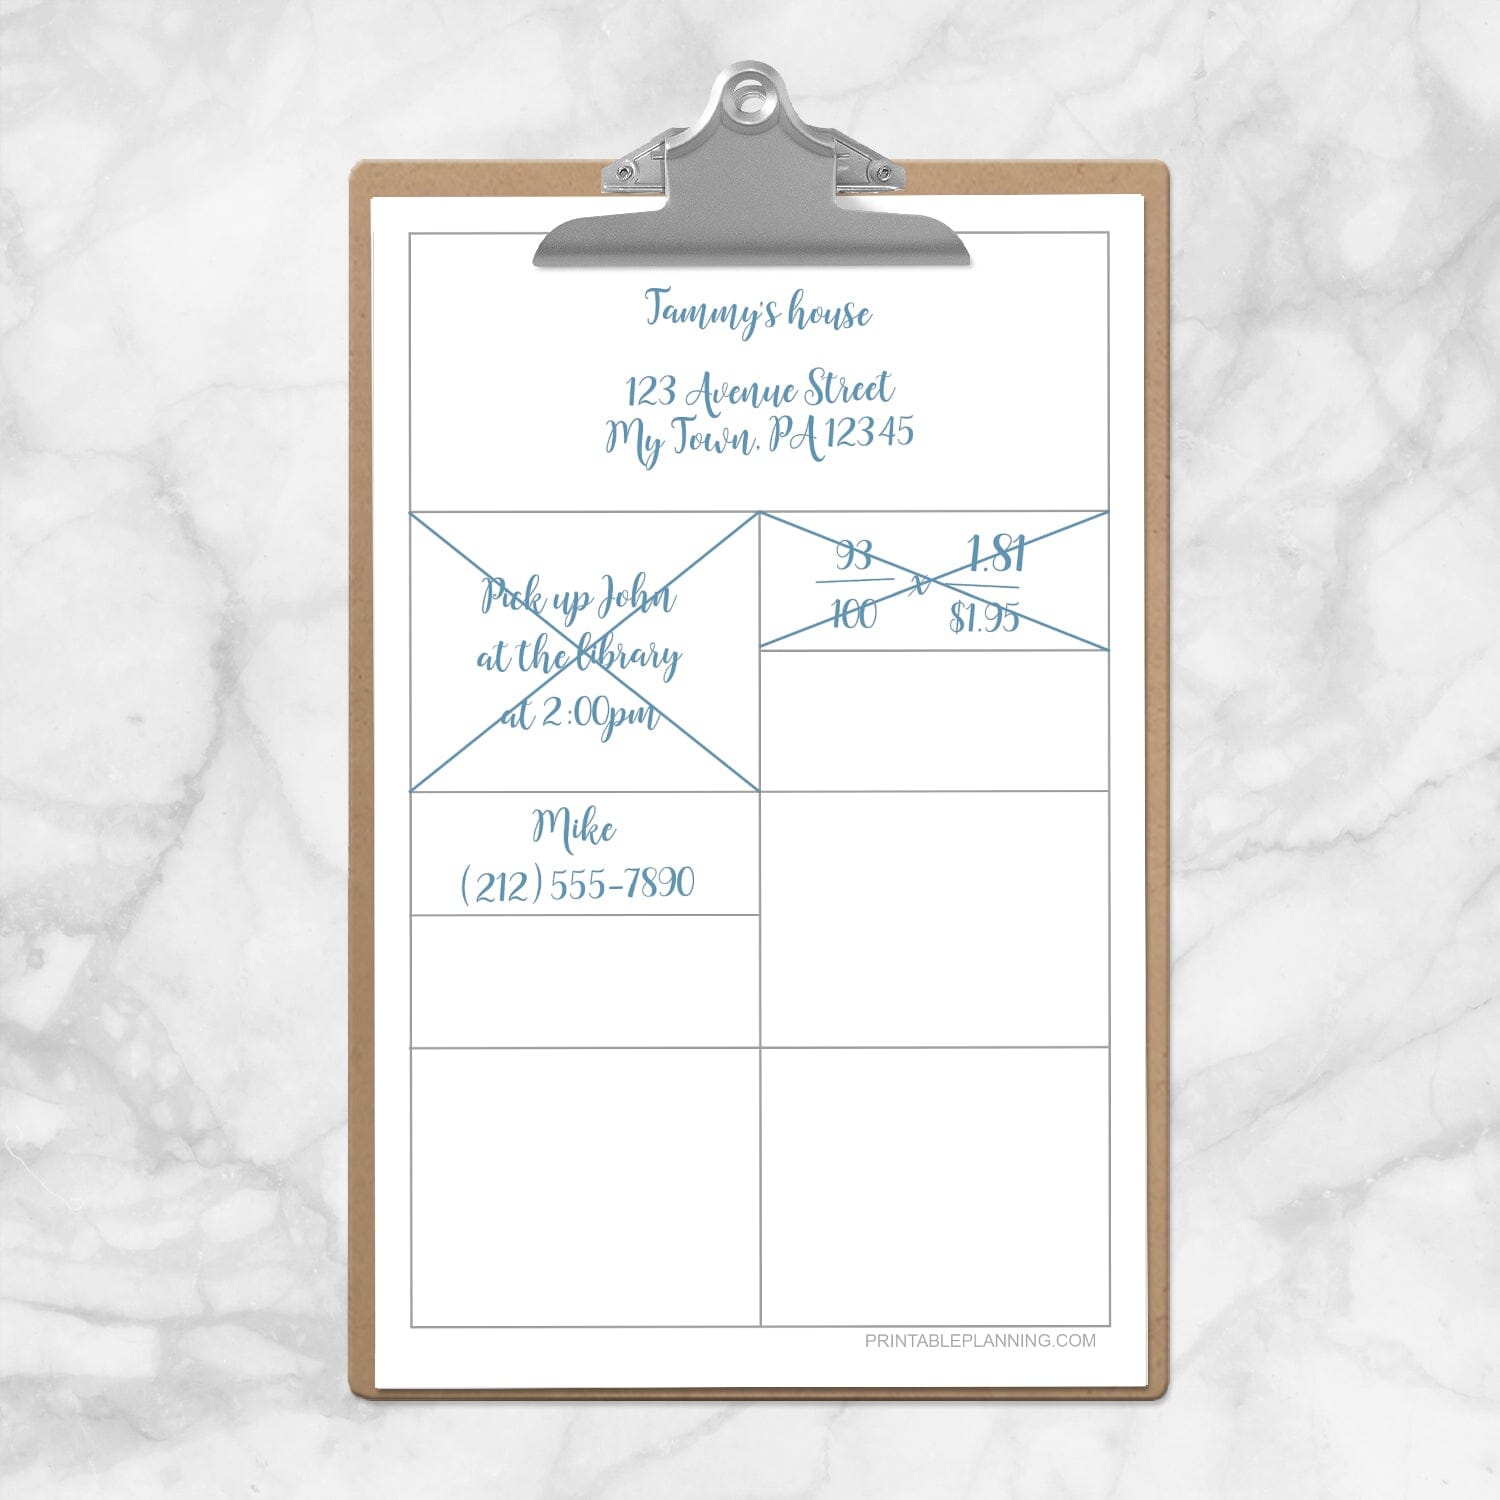 Compartmentalized Scratch Paper - Half Page - Printable at Printable  Planning for only 1.95